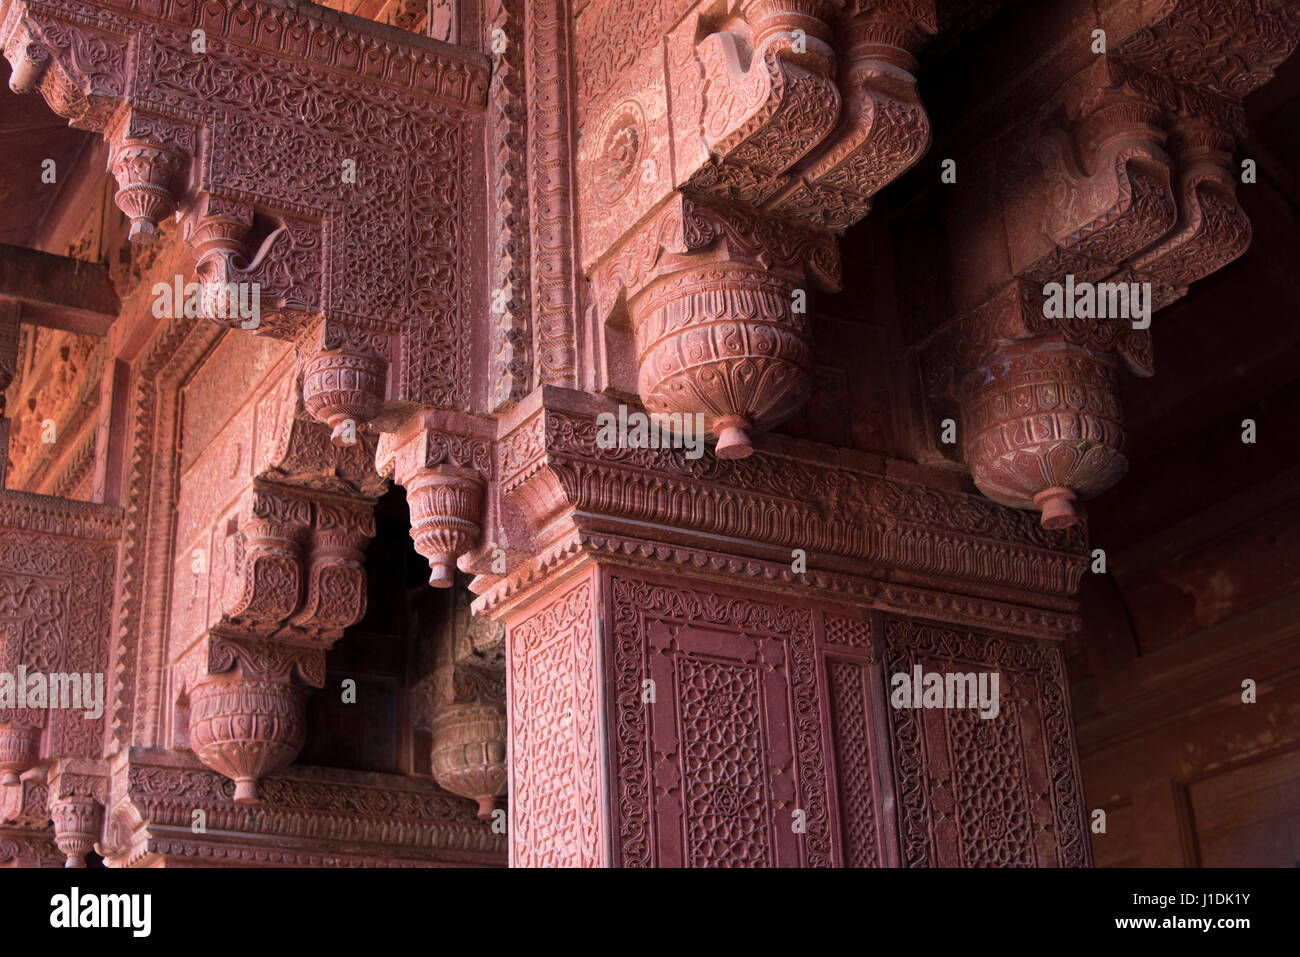 Stone carvings inside a palace at Agra Fort, India Stock Photo